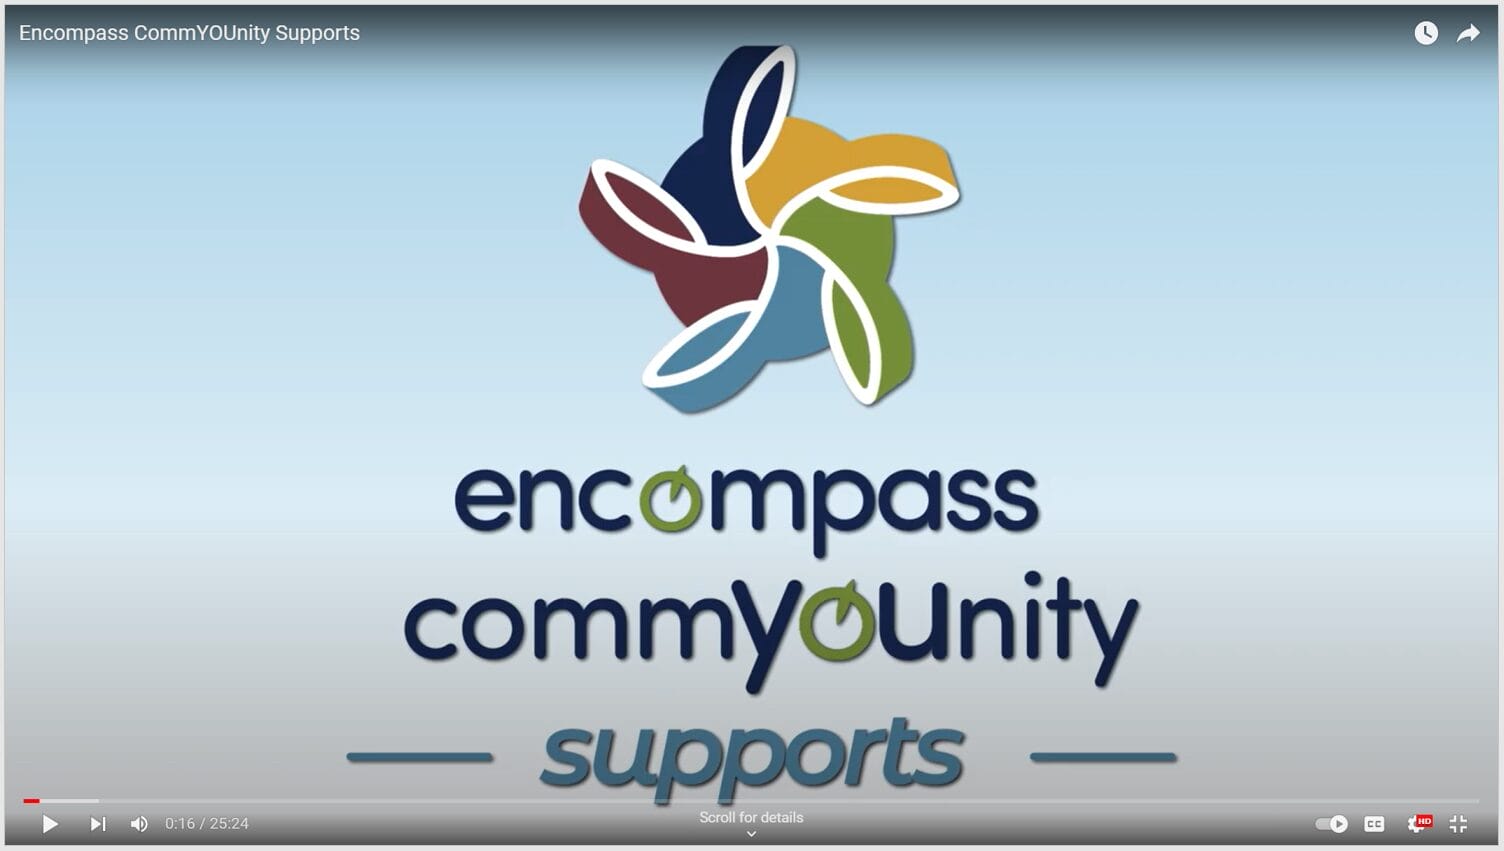 Encompass Community Supports videos on CommYOUnity of Culpeper Media Network